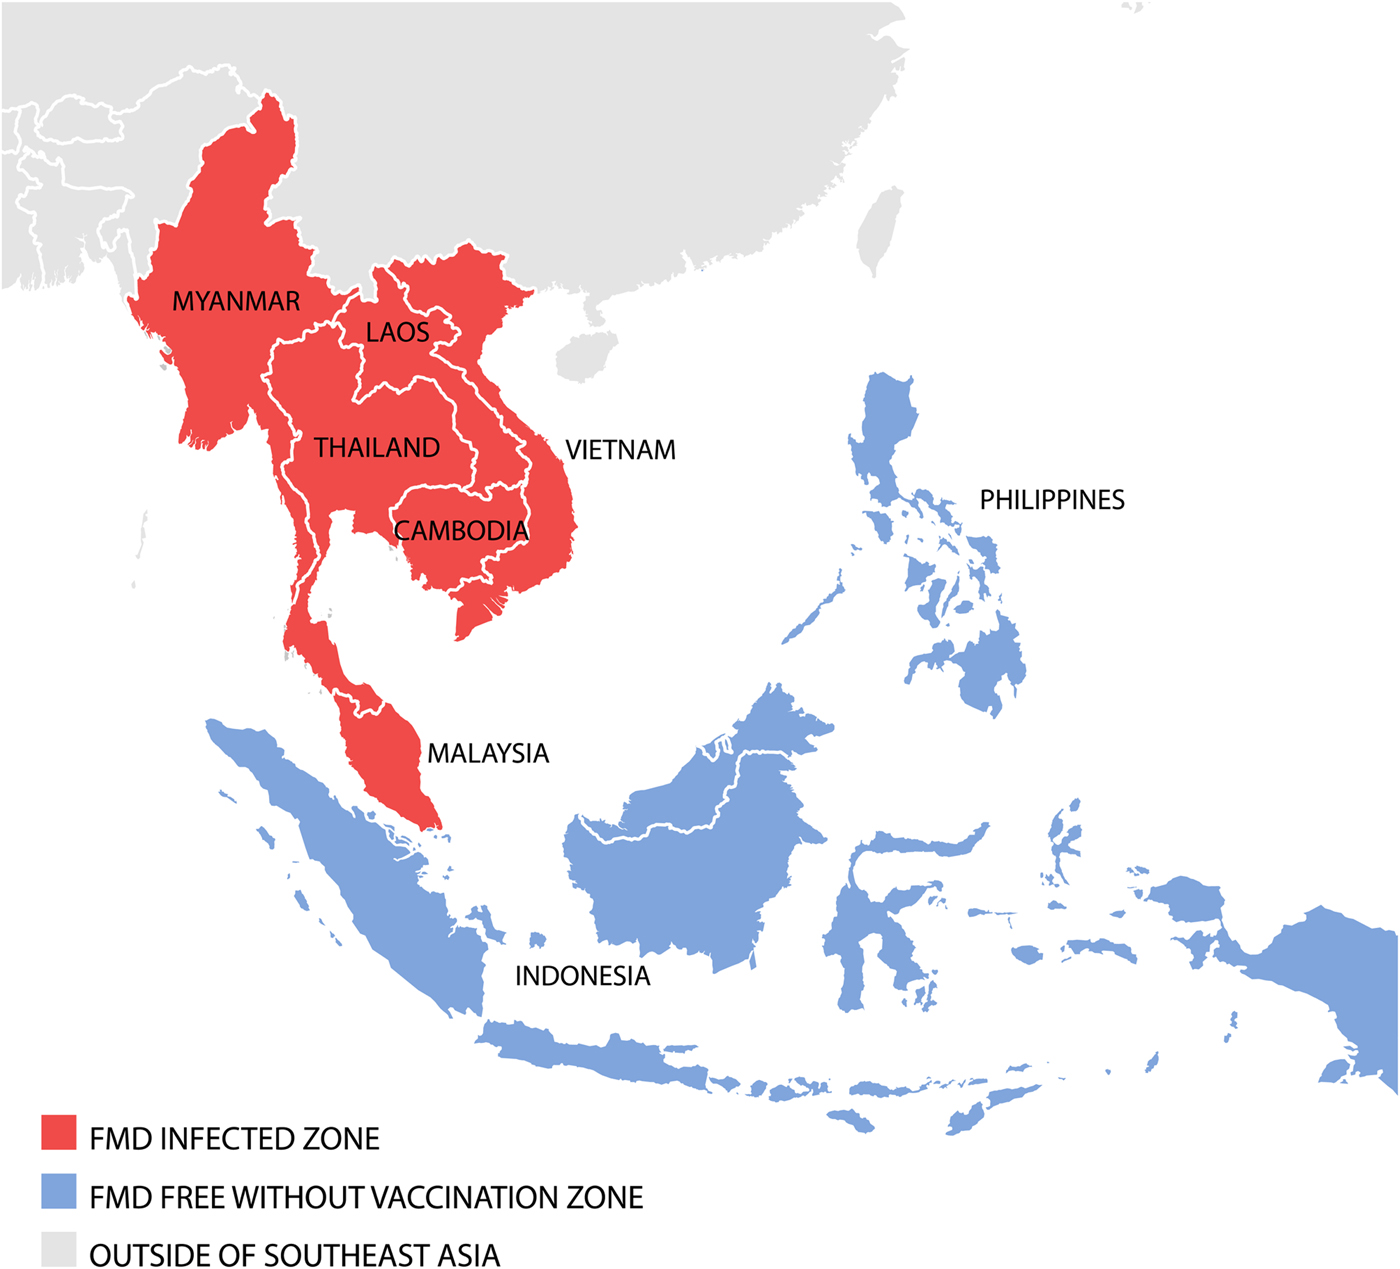 A history of FMD research and control programmes in Southeast Asia ...